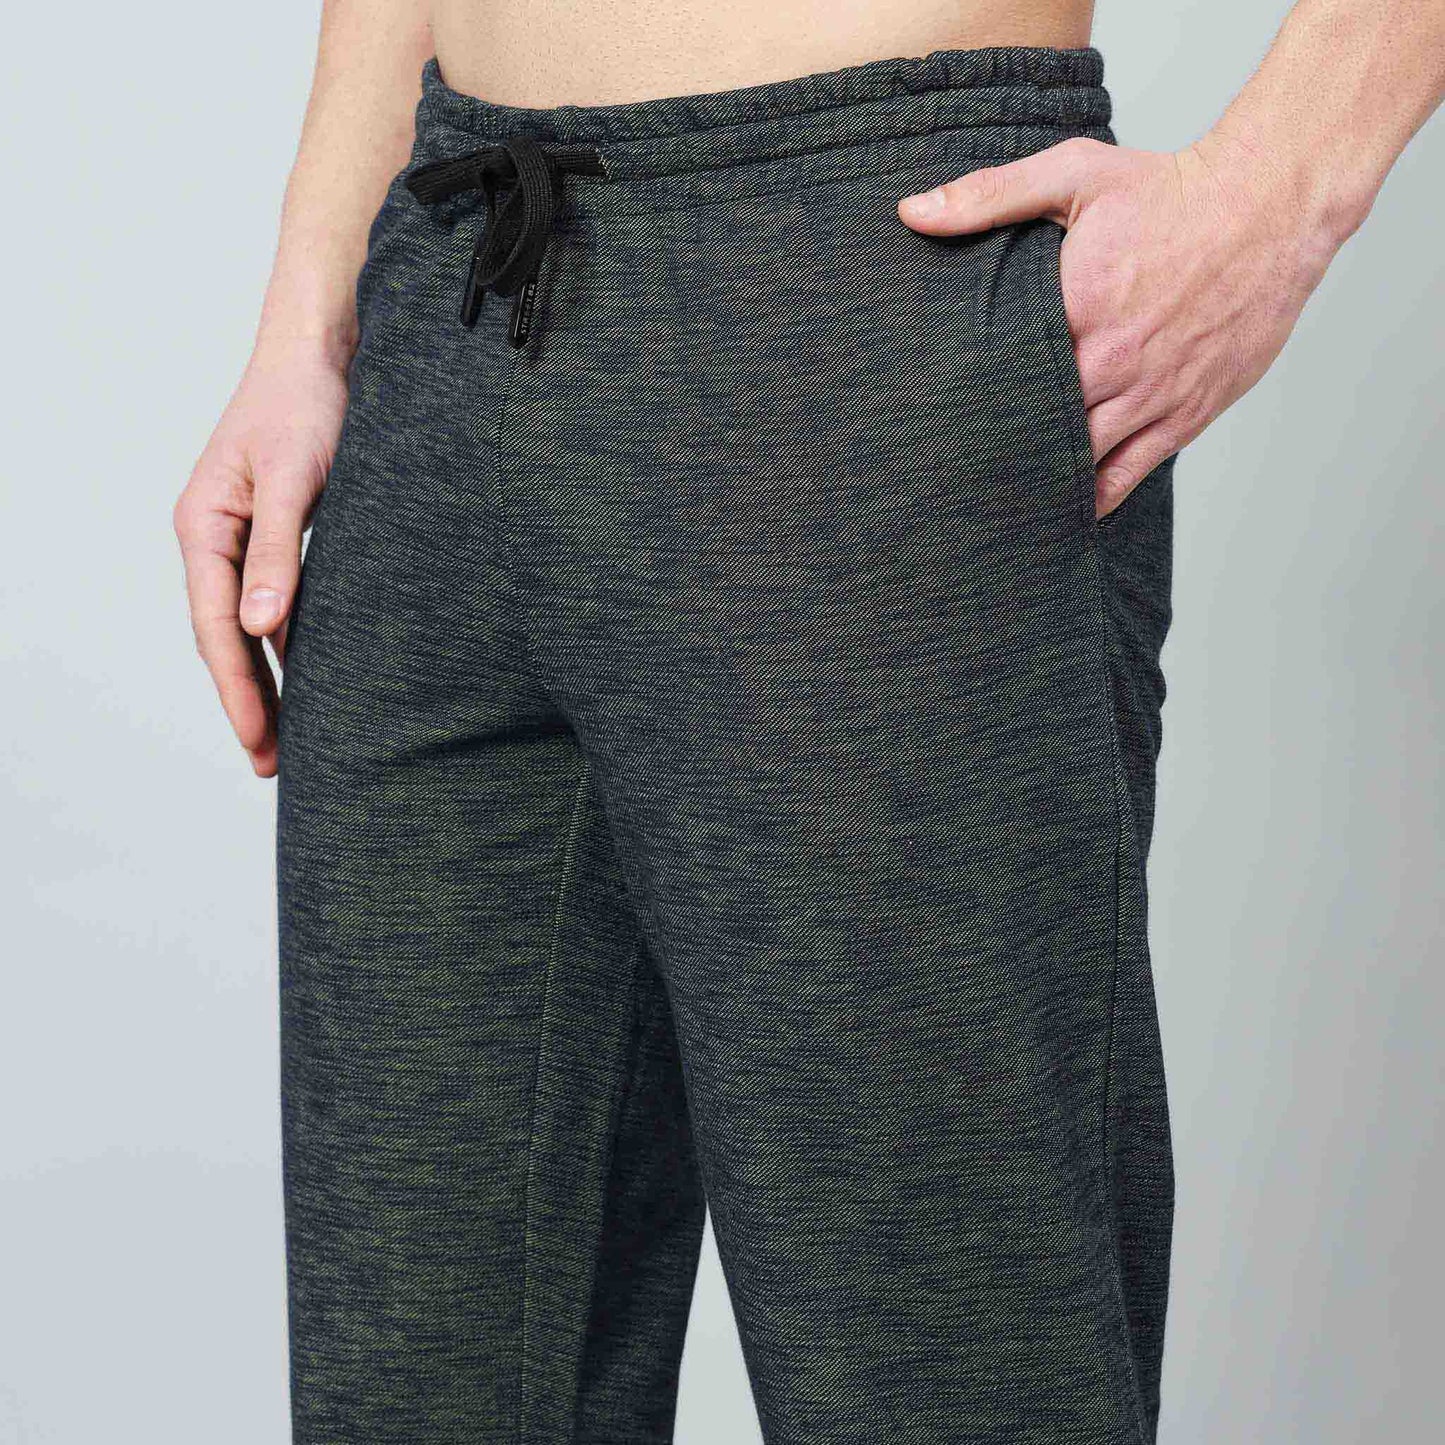 Gents Cotton Launch Pants with Elastic Waistband